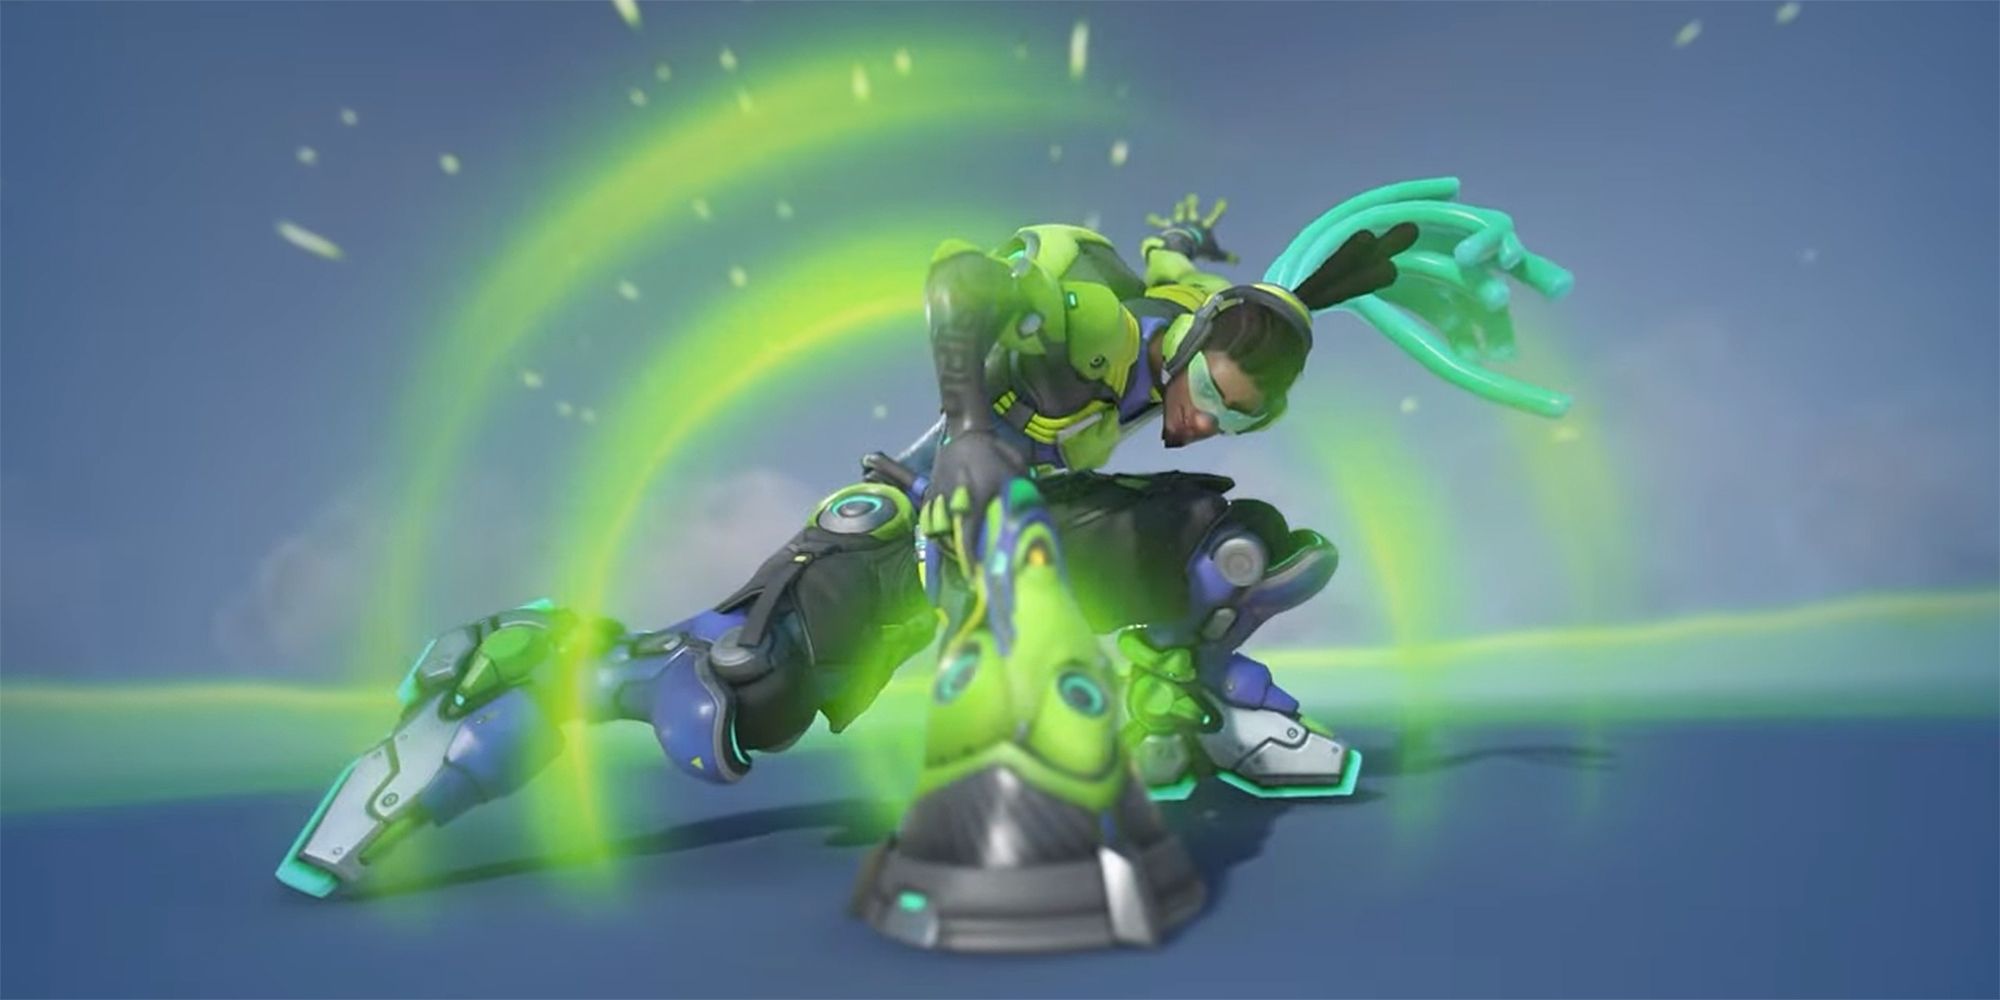 lucio using ultimate sound barrier in highlight intro